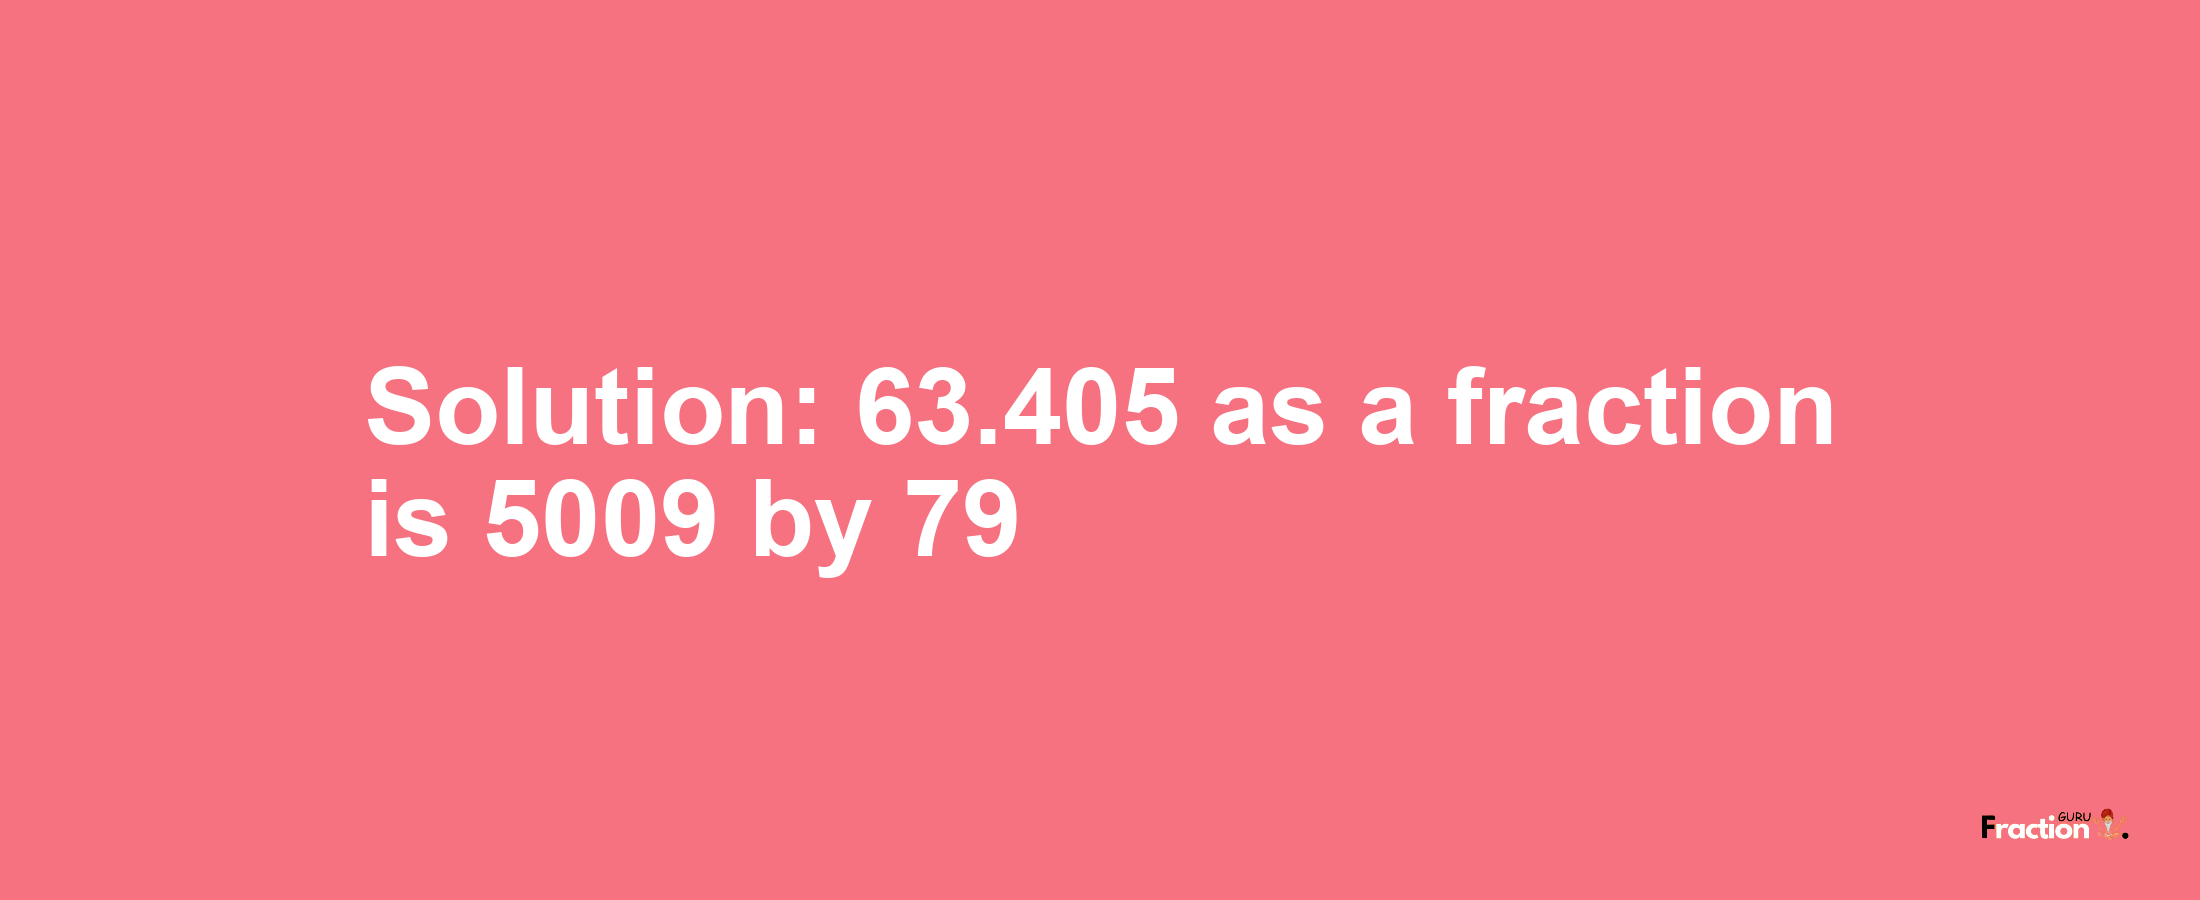 Solution:63.405 as a fraction is 5009/79